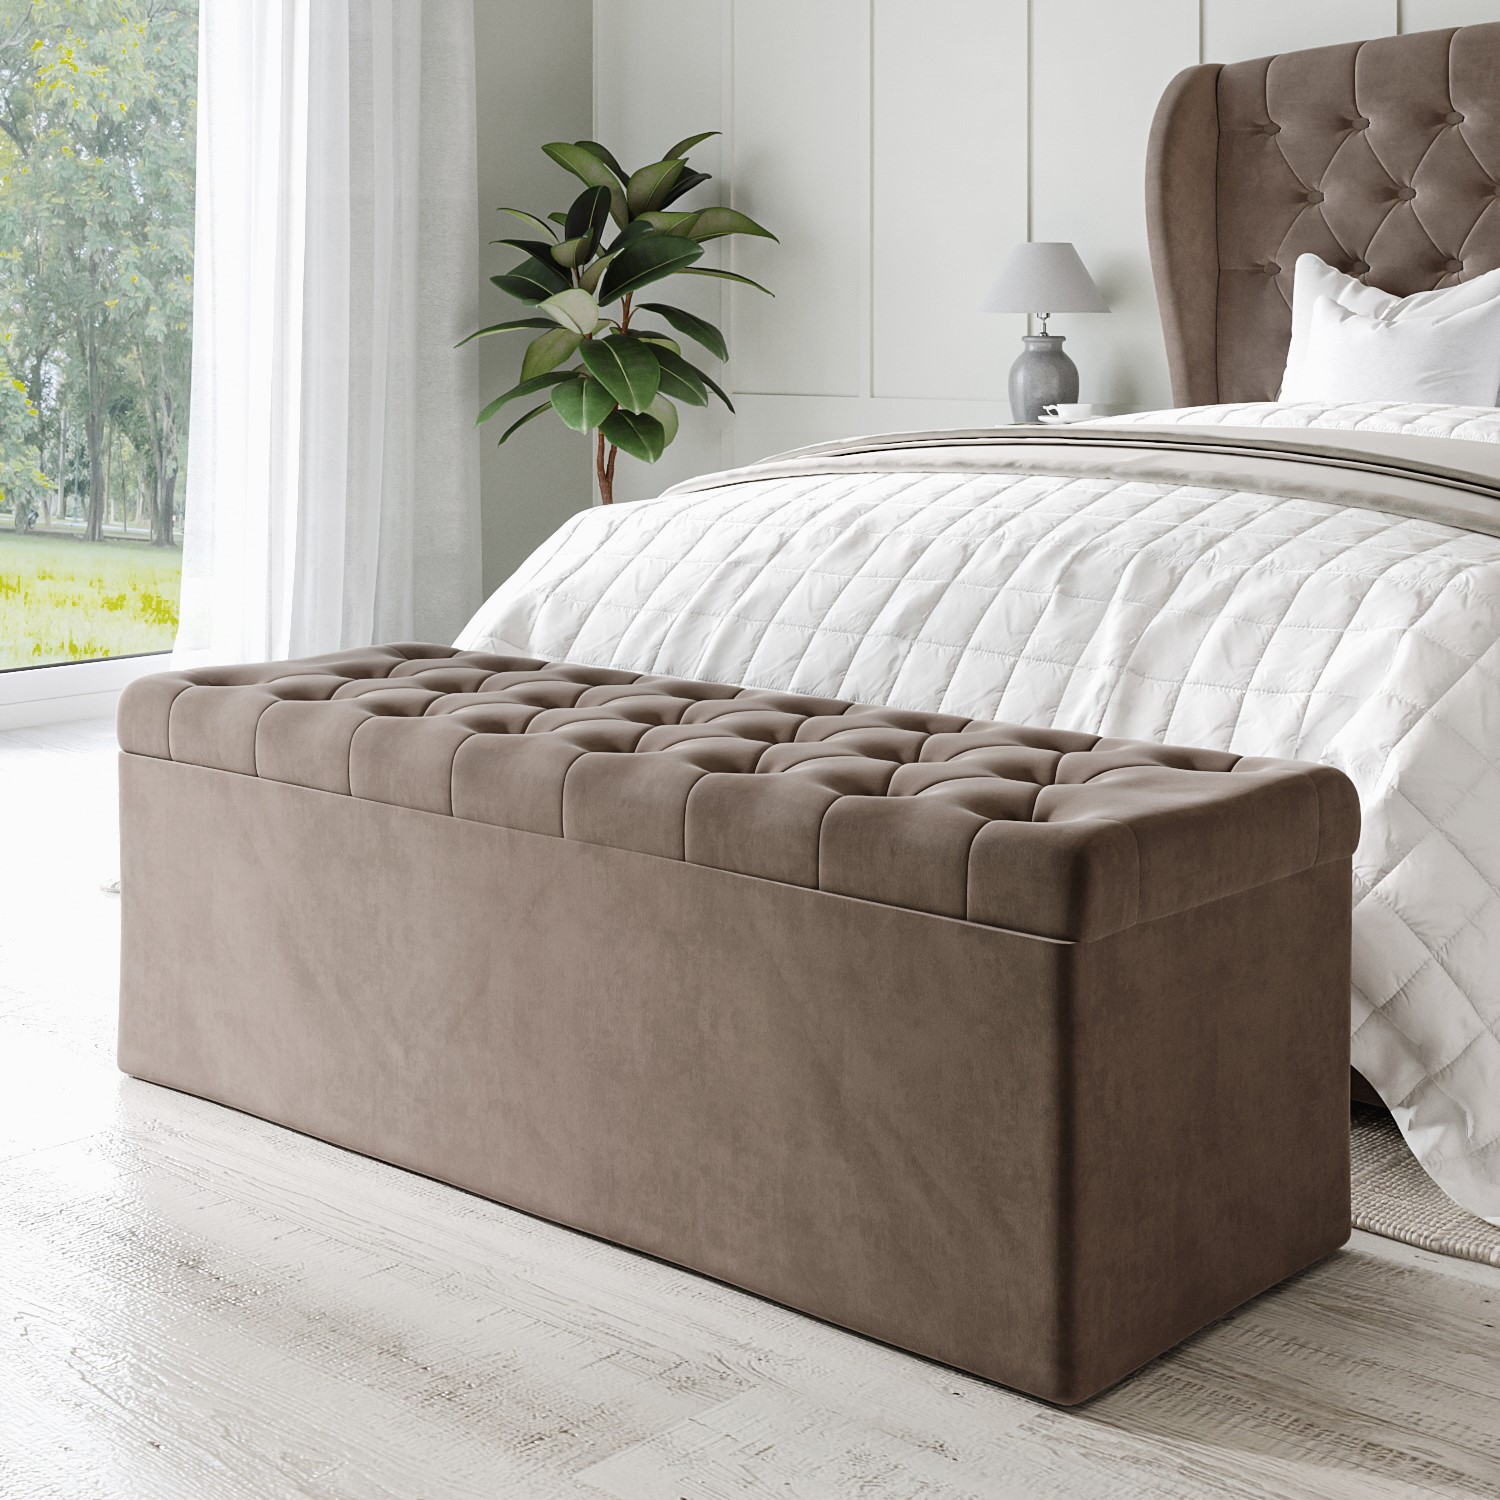 Read more about Mink brown velvet king size ottoman bed with blanket box safina